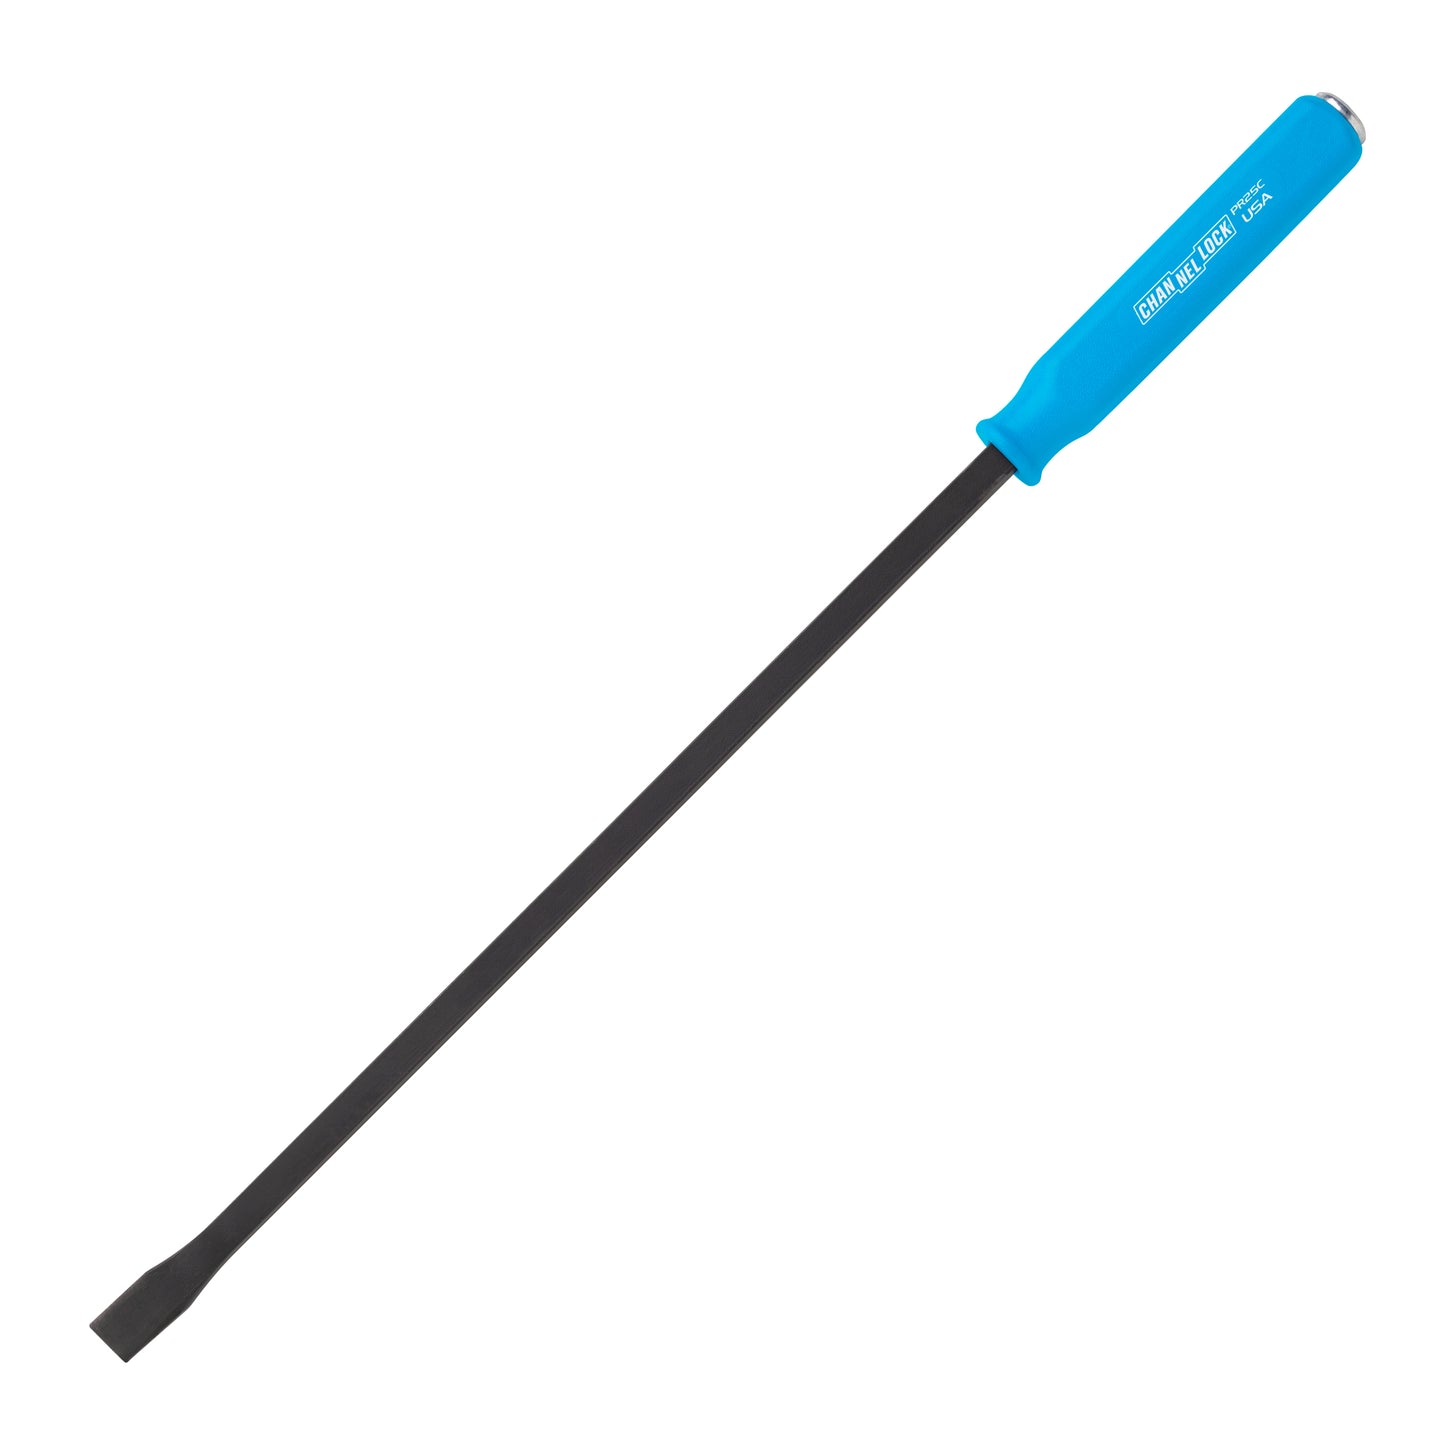 1/2 x 18-inch Professional Pry Bar, 25-inch Overall Length (PR25C)